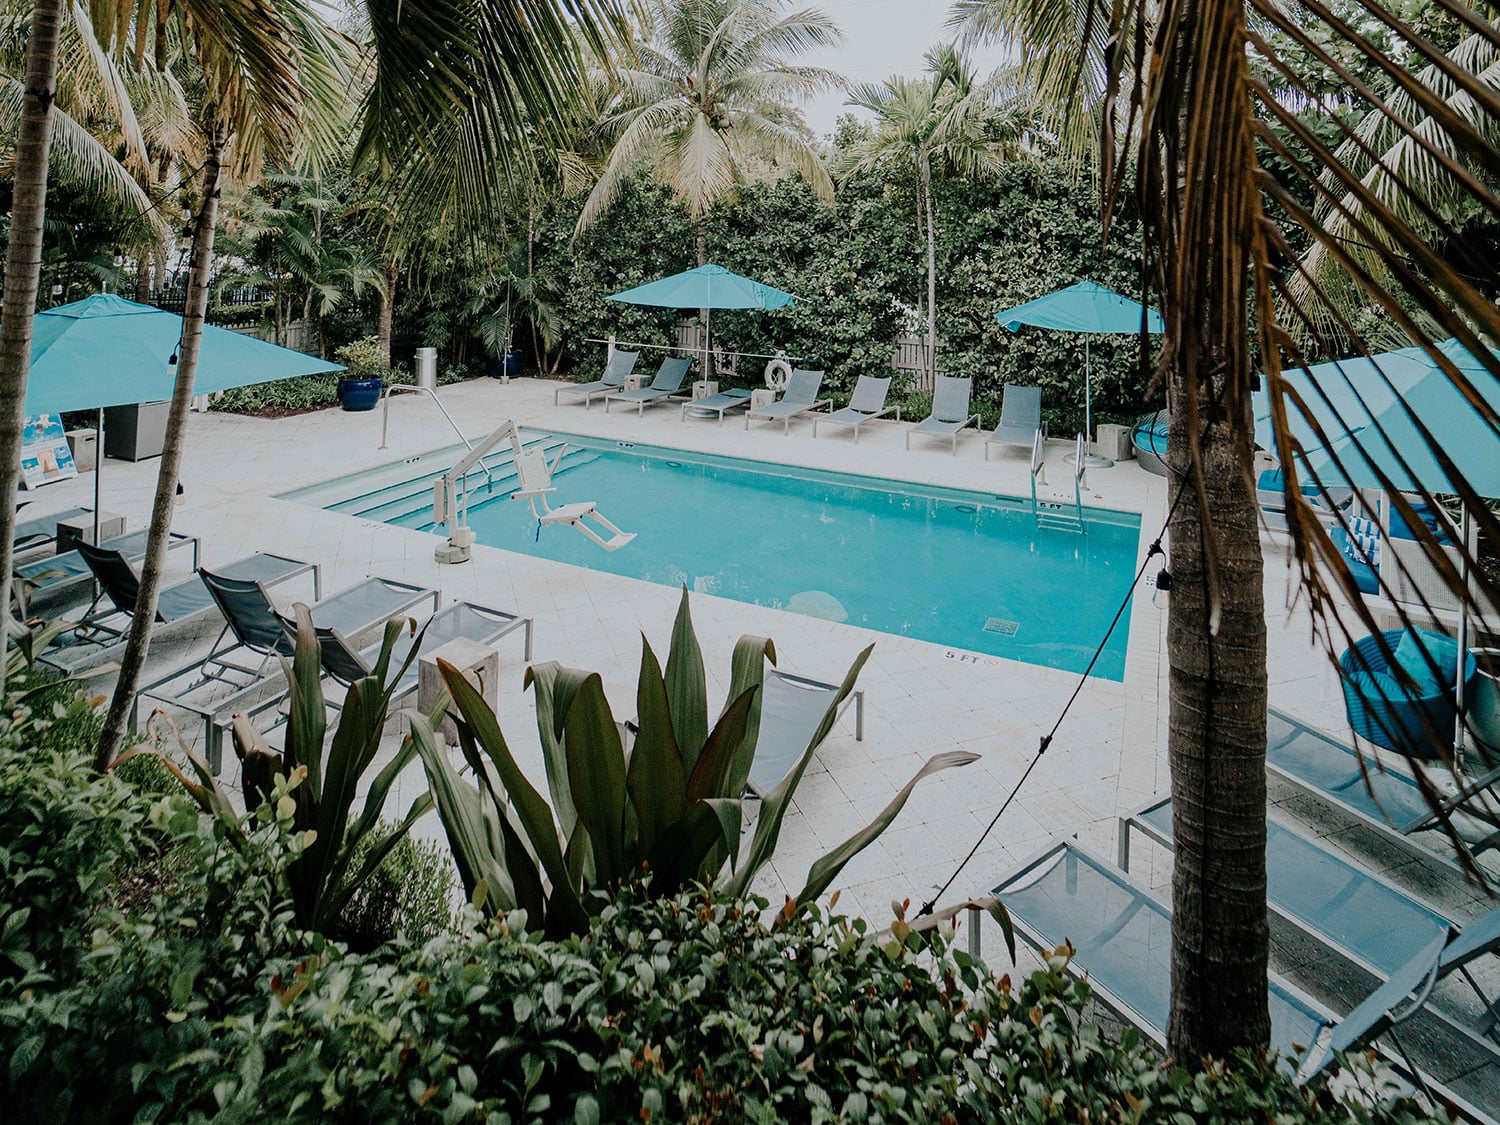 A resort style lounge pool surrounded by lush, tropical plants at The Marker Key West Harbor Resort.